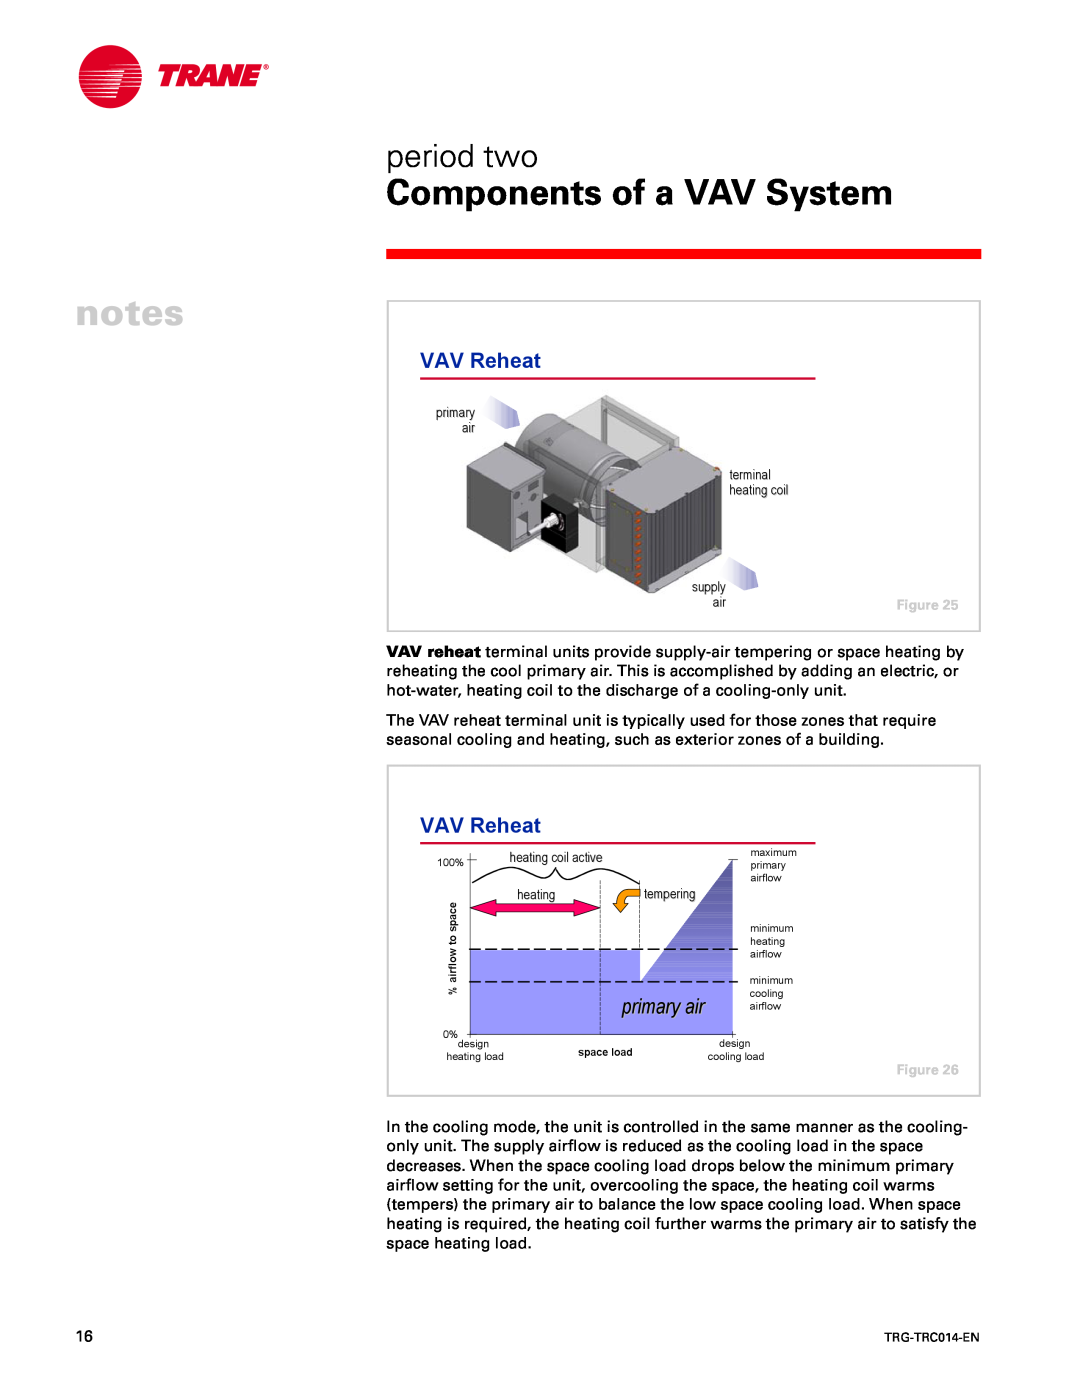 Trane TRG-TRC014-EN manual VAV Reheat, primary air, Components of a VAV System, period two 